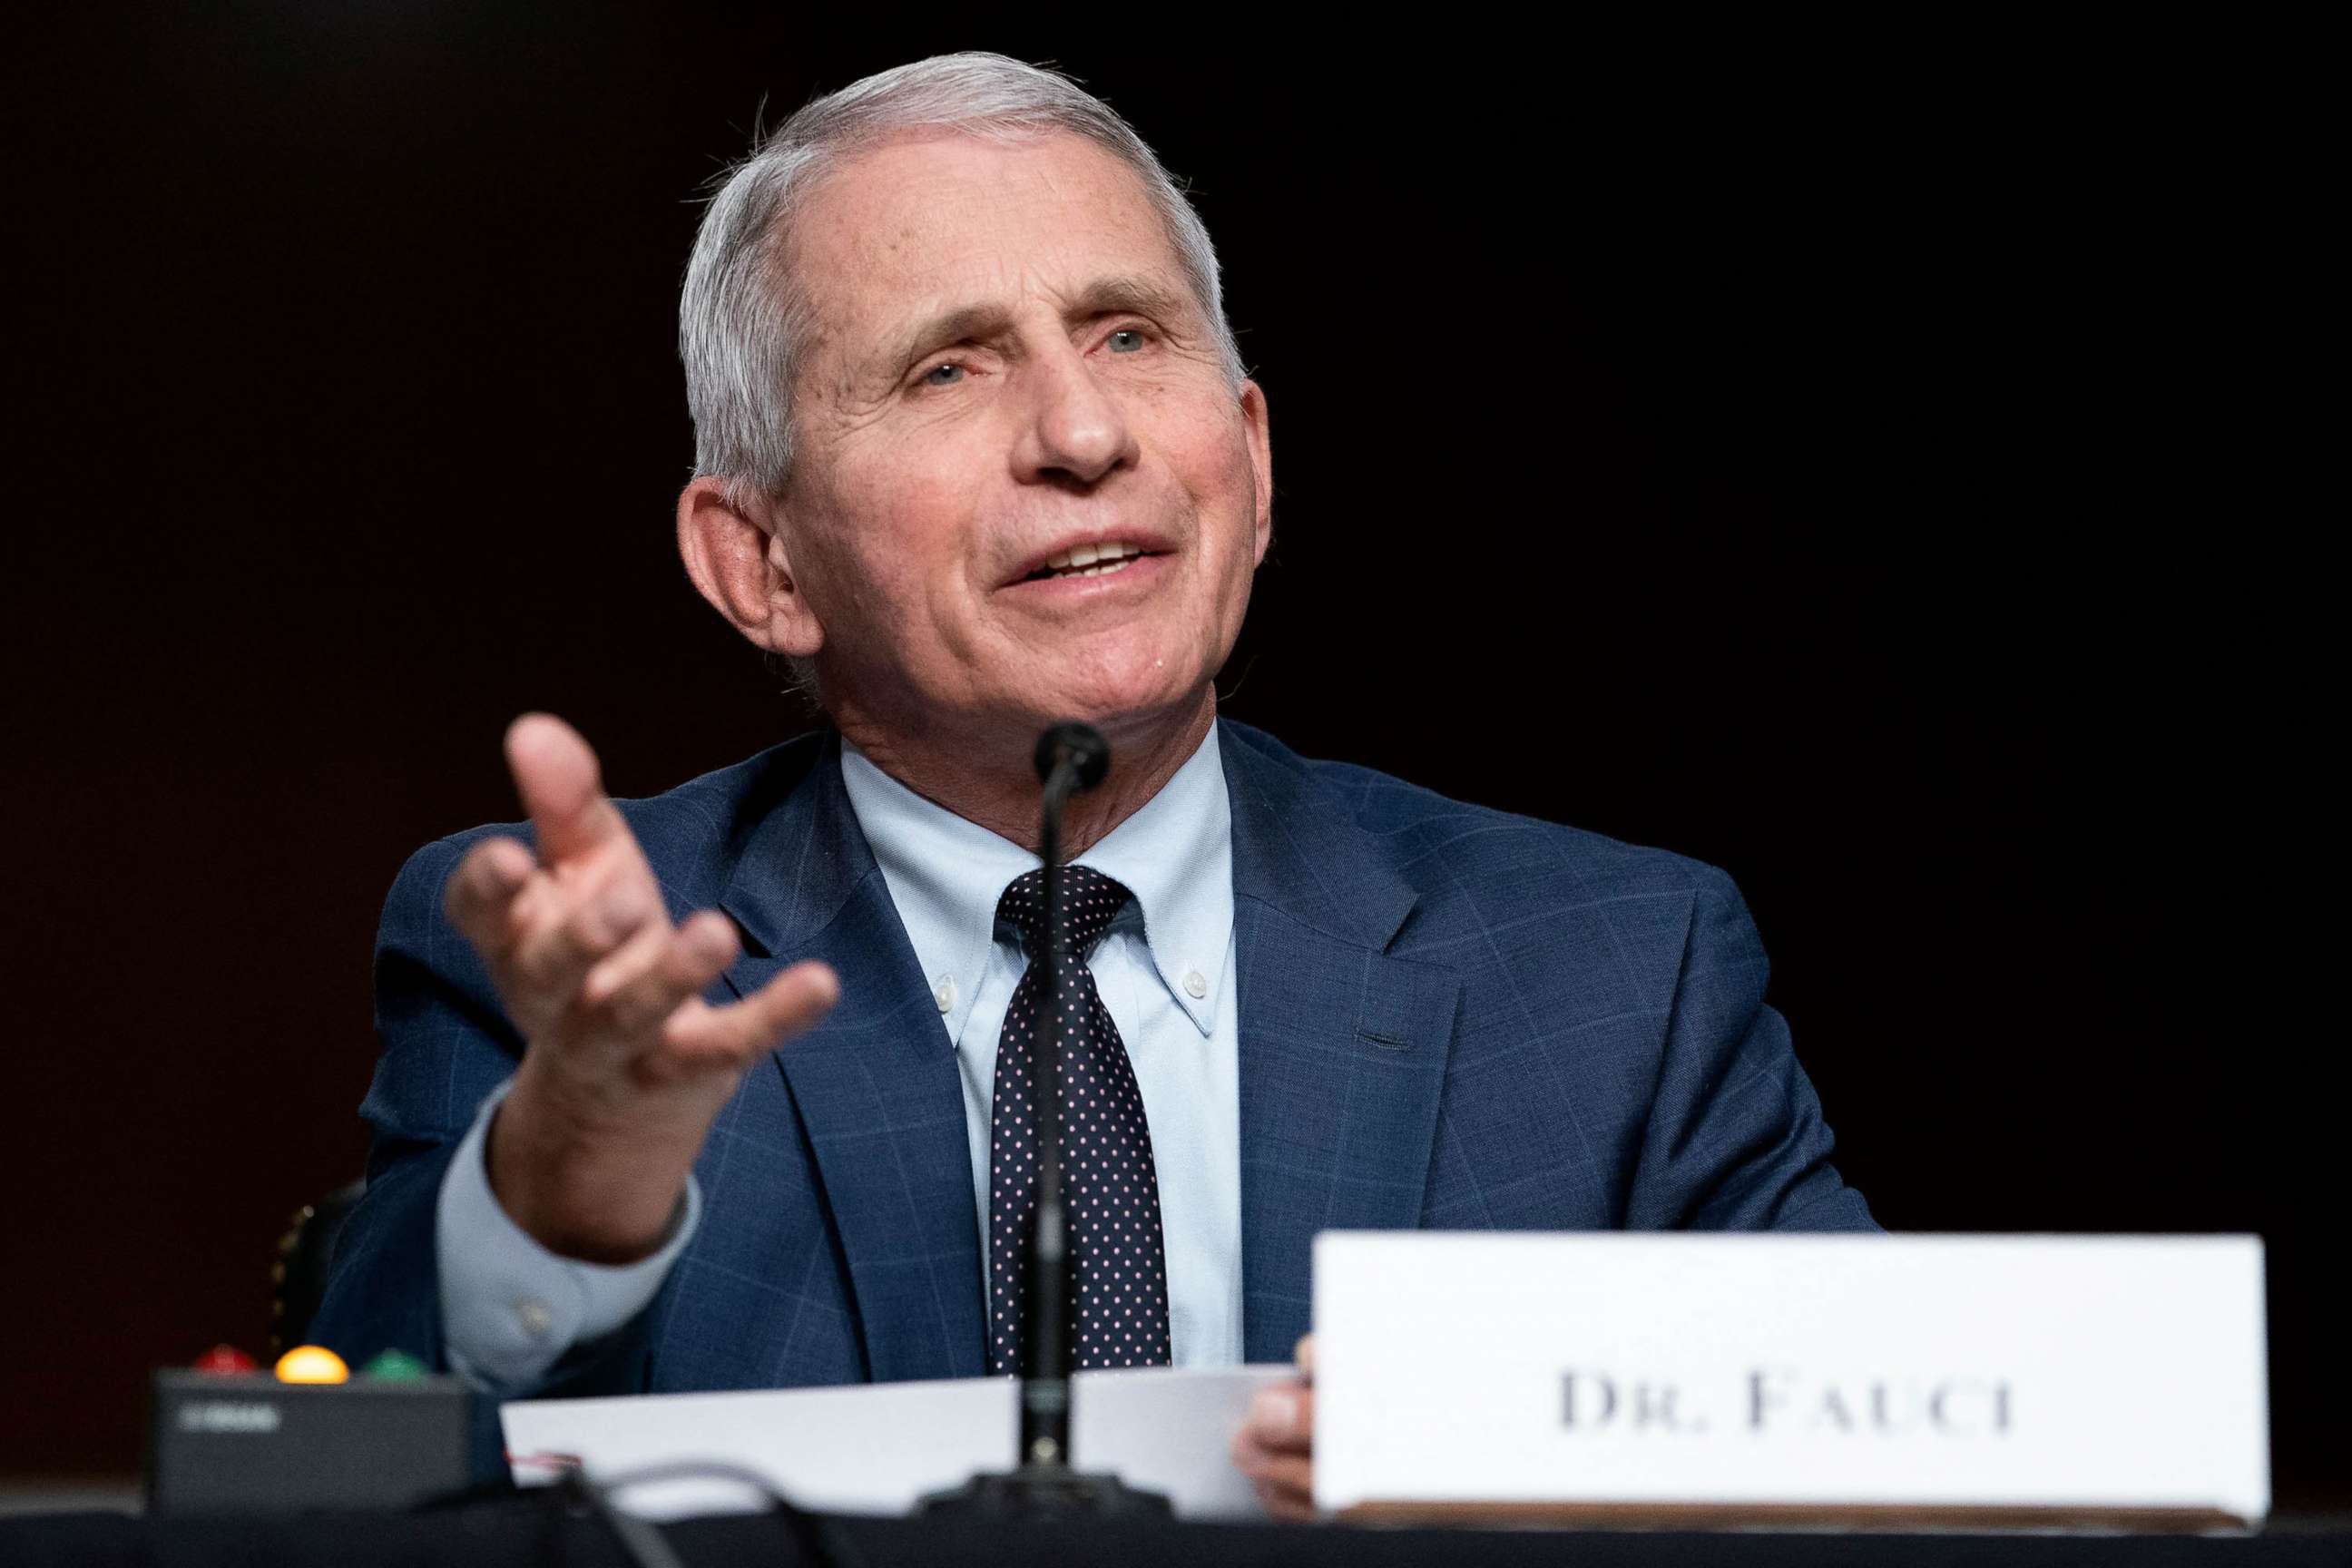 PHOTO: Dr. Anthony Fauci gives an opening statement during a Senate Health, Education, Labor, and Pensions Committee hearing to examine the federal response to Covid-19 and new emerging variants on Capitol Hill, Jan. 11, 2022.